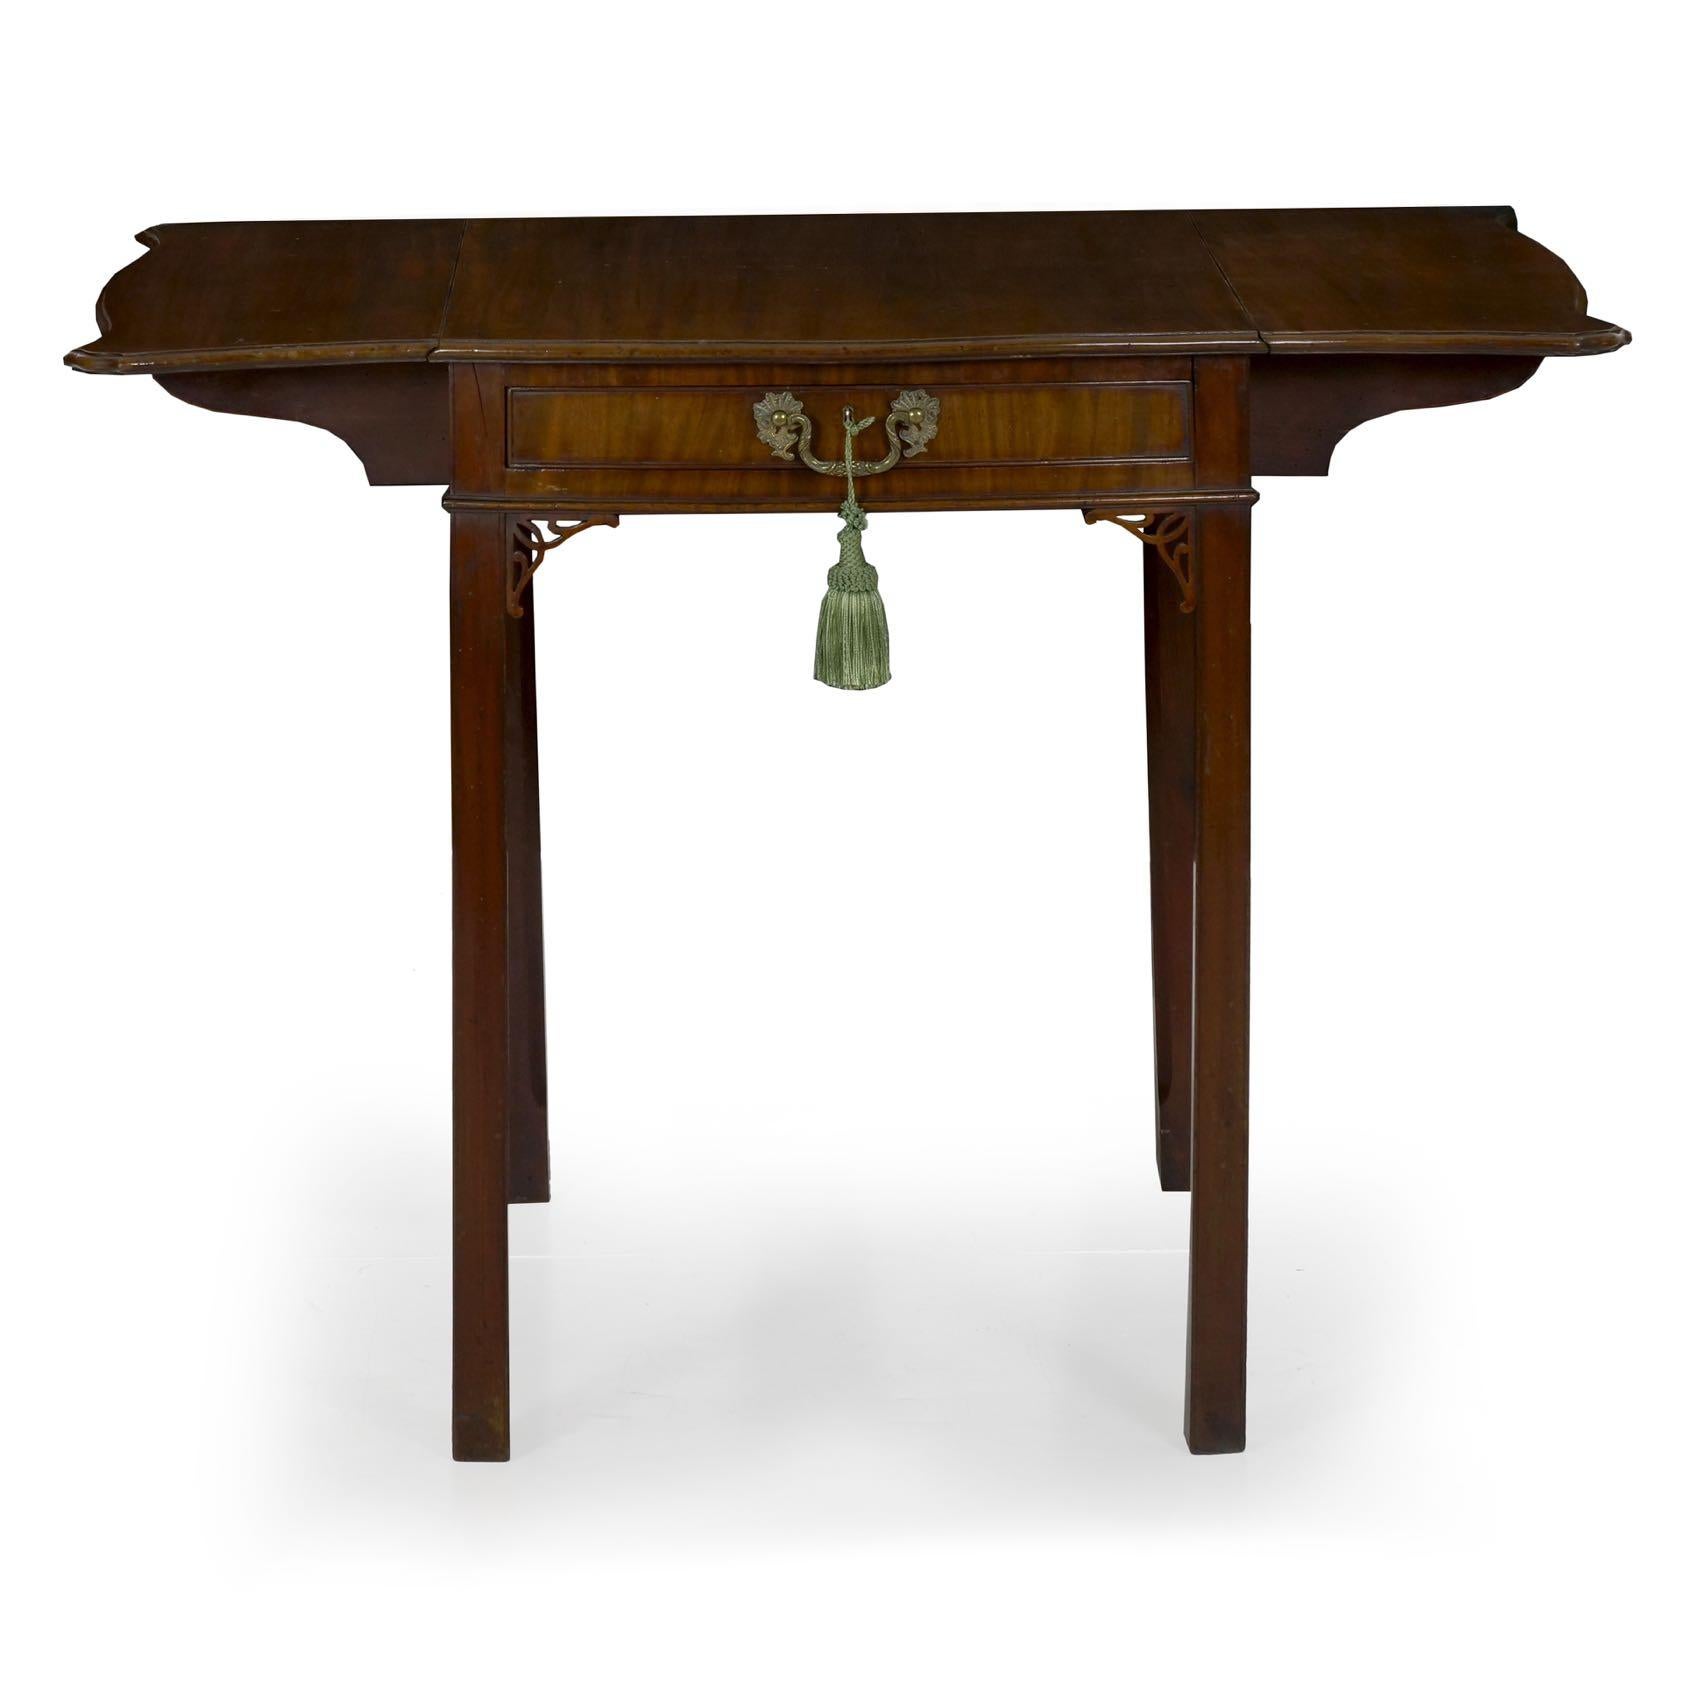 A very fine Chippendale period Pembroke table preserved in beautiful original condition, this exquisite gem is crafted of a dense Cuban mahogany in the primary surfaces throughout. This wood takes on a gorgeous polish and the patina has built up to